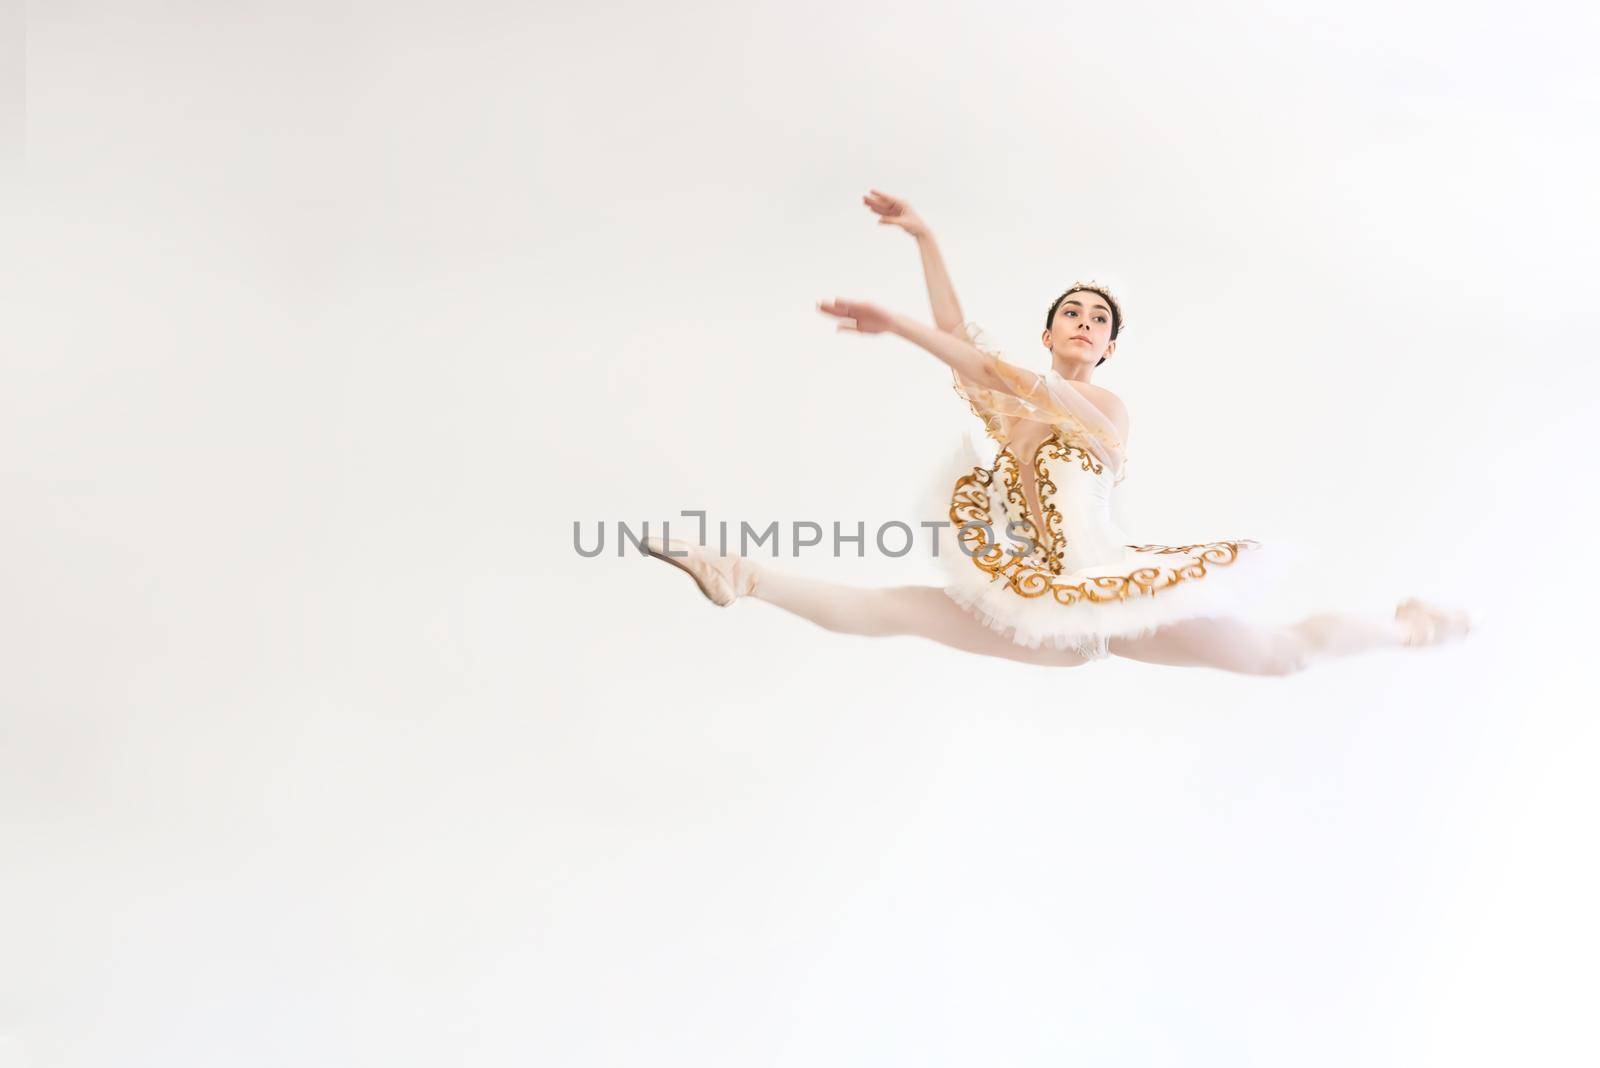 A young ballerina does ballet exercises in a jump against a white background by Nickstock